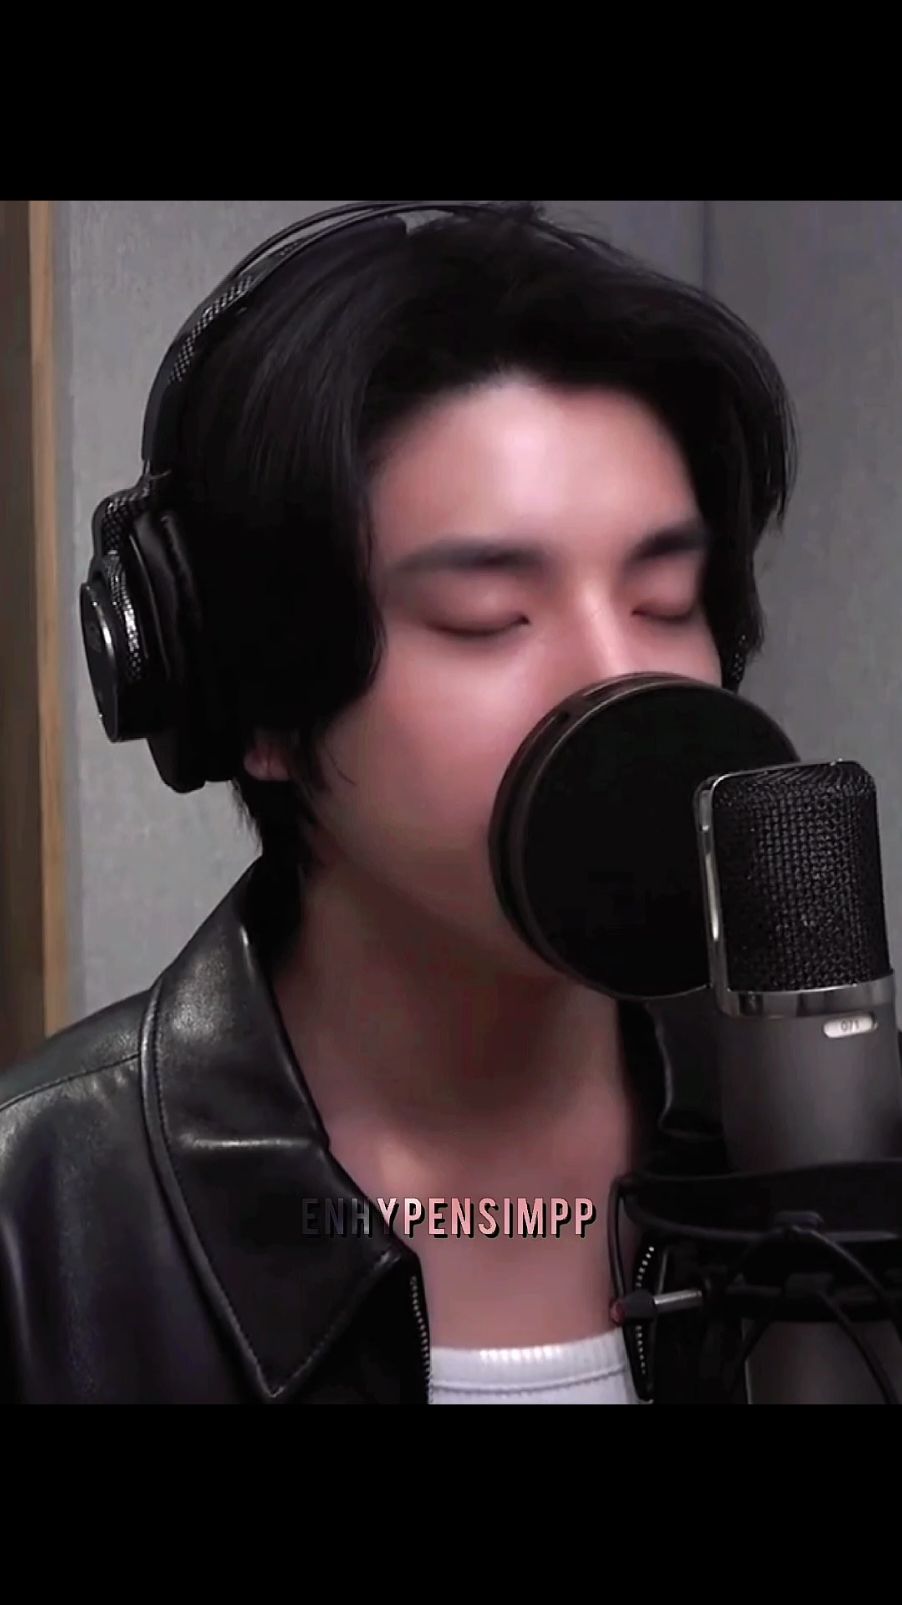 ENHYPEN HIGHWAY 1009 RECORDING ❤️ they sound so good~ antis should never speak on enhypen's vocals again. I CAN'T WAIT TO HEAR THIS LIVE ON THEIR WORLD TOUR 🥺😭 #highway1009 #ROMANCE_UNTOLD  #ENHYPEN #엔하이픈 #추천 #ENGENE #kpopmainslayer #fyp #foryou #kpop #xyzbca #viral #enhypensimpp @enhypen 